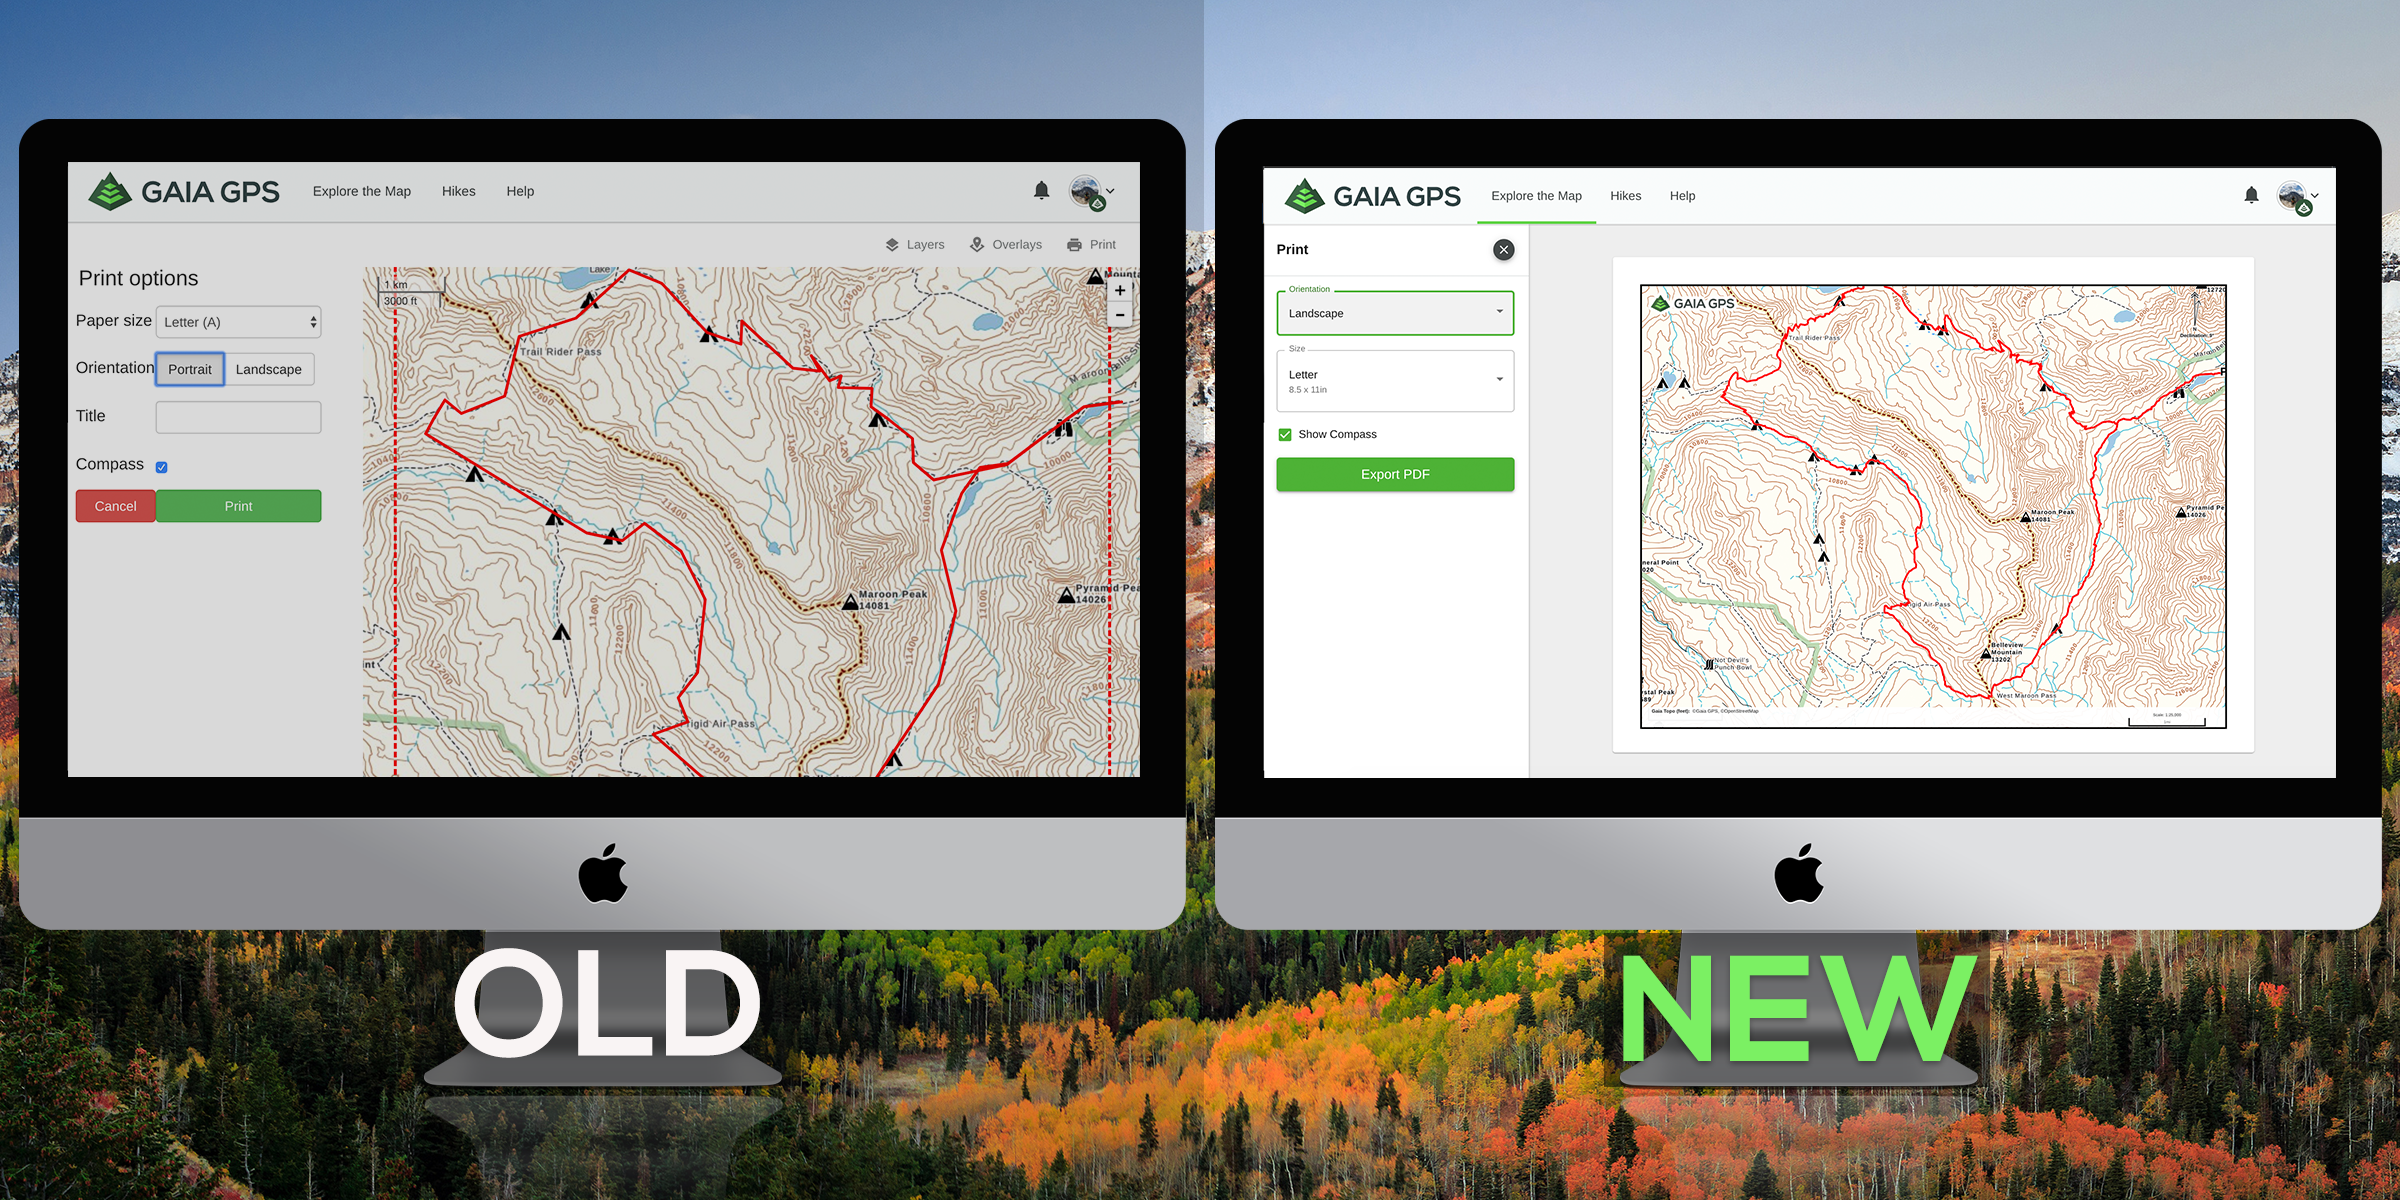 Two screens showing a comparison of the new versus old print preview screen. New print preview shows entire map selection and mock-up of paper map.